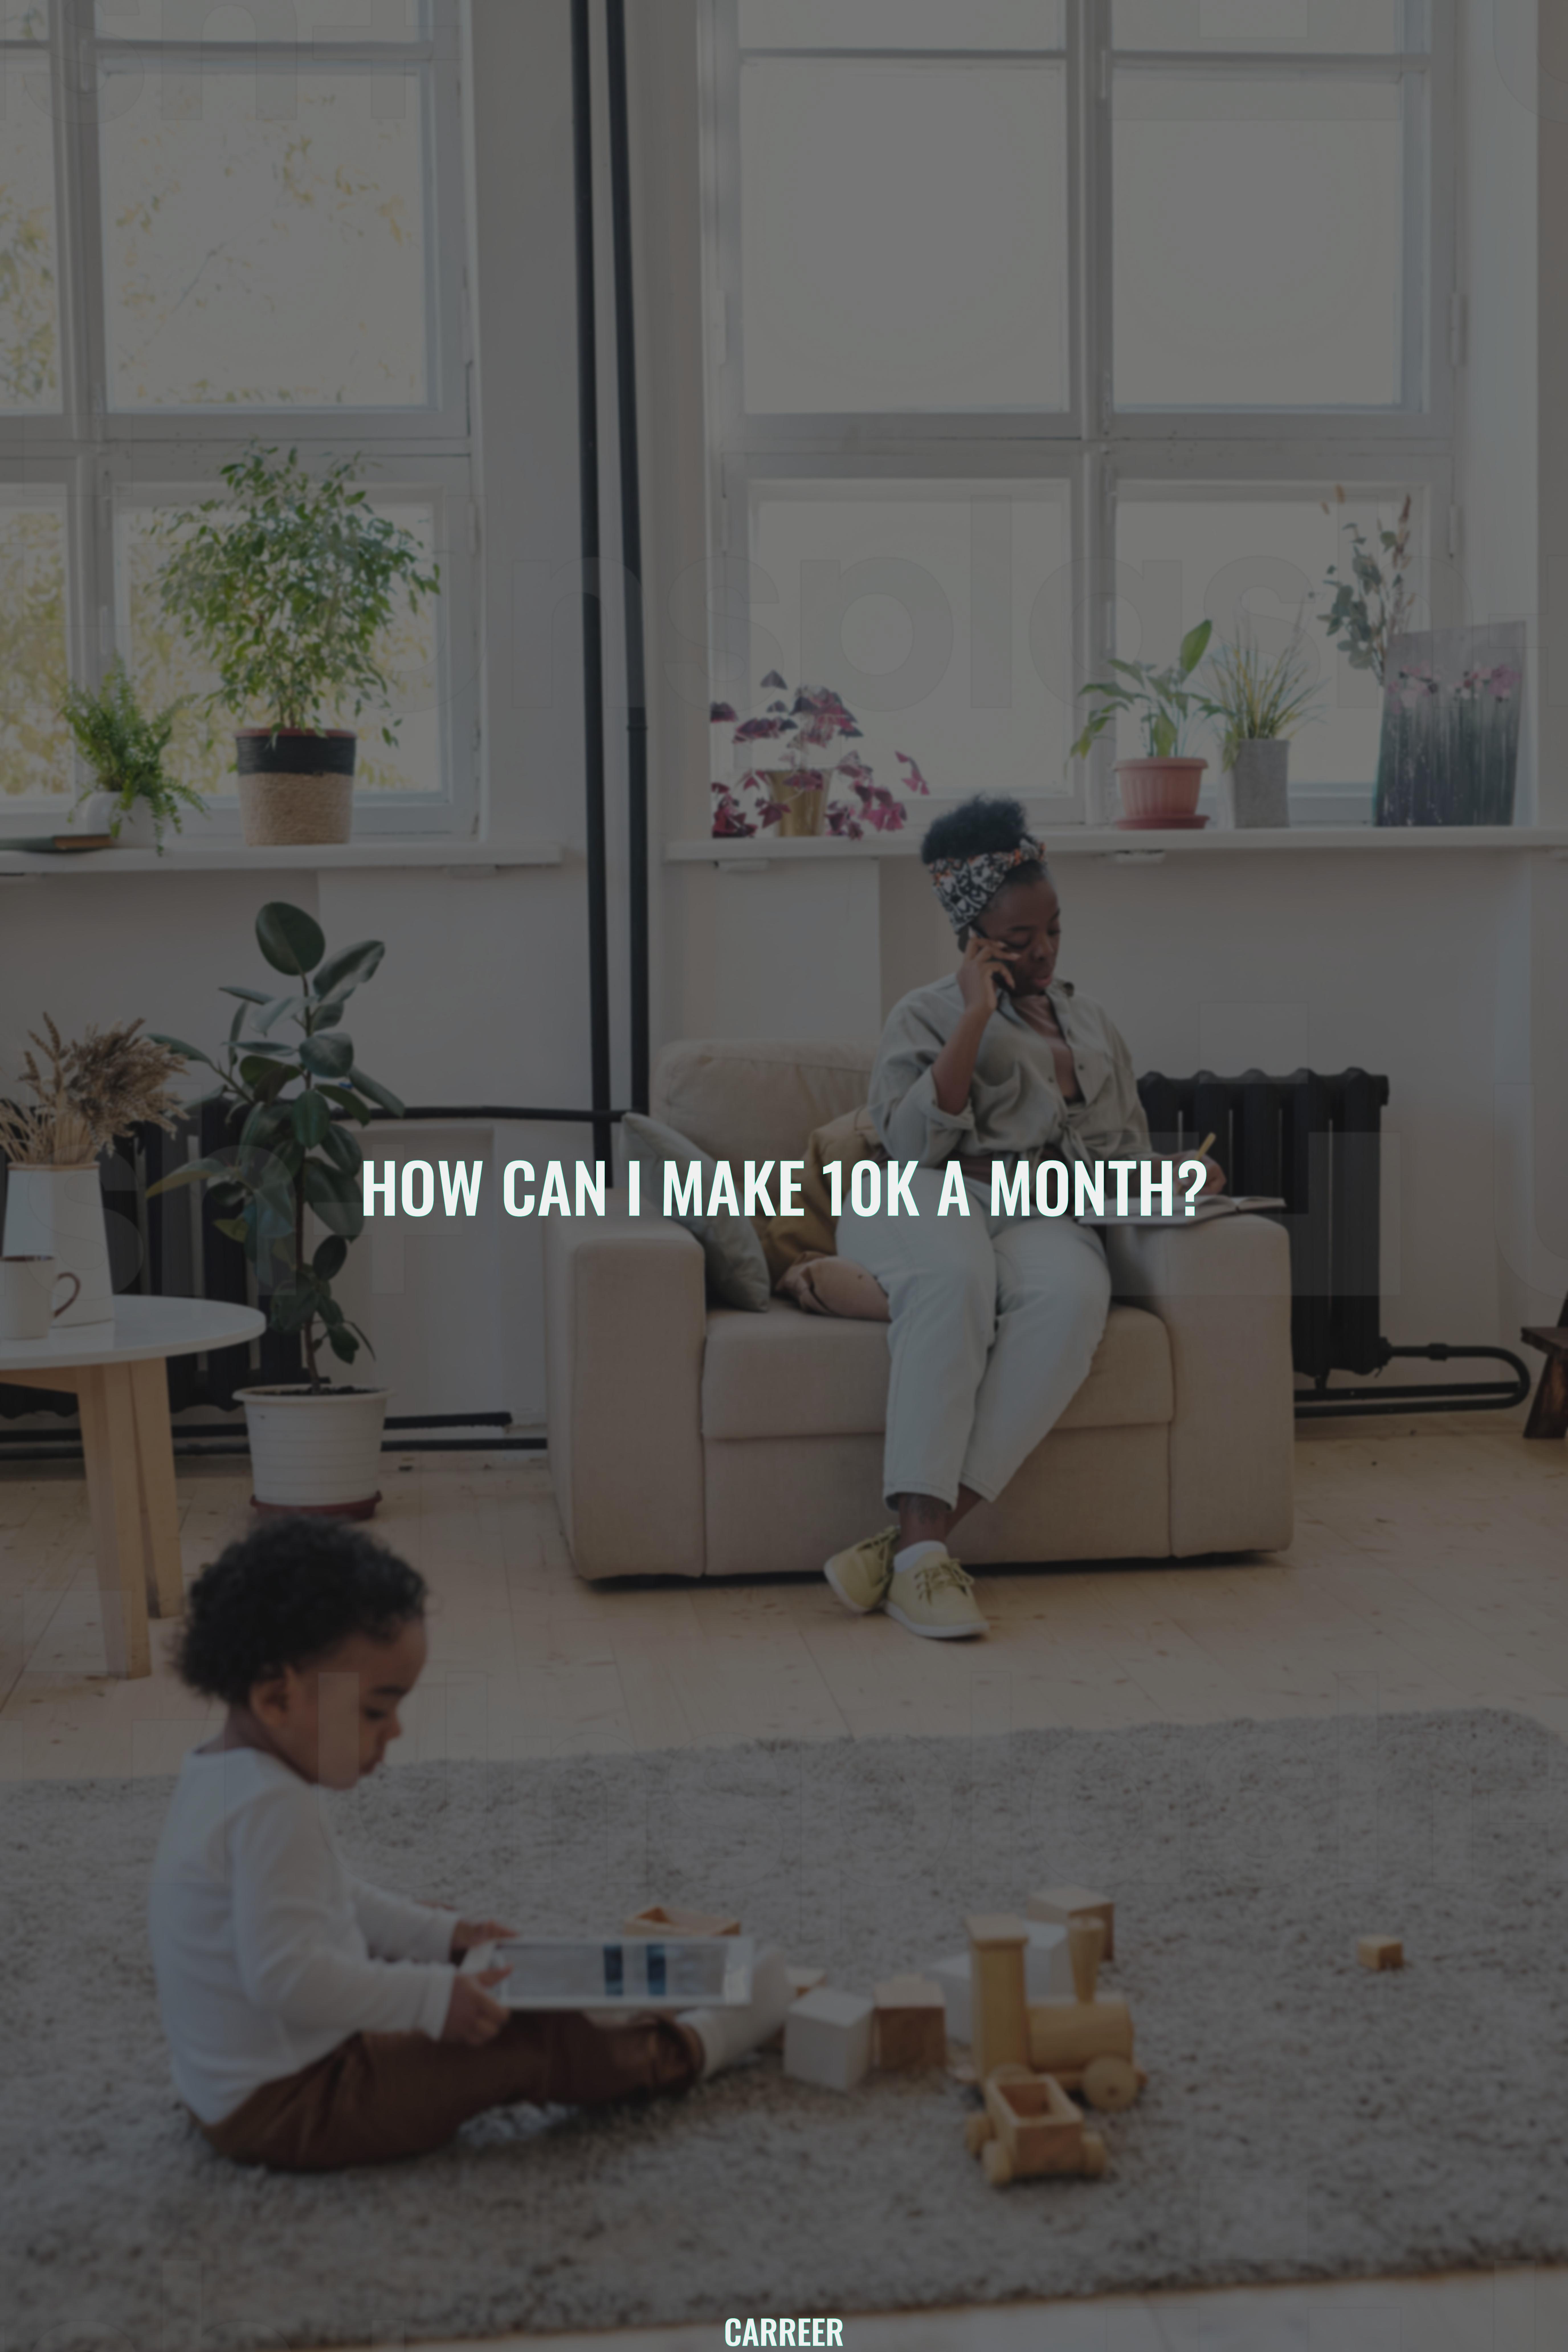 How can i make 10k a month?